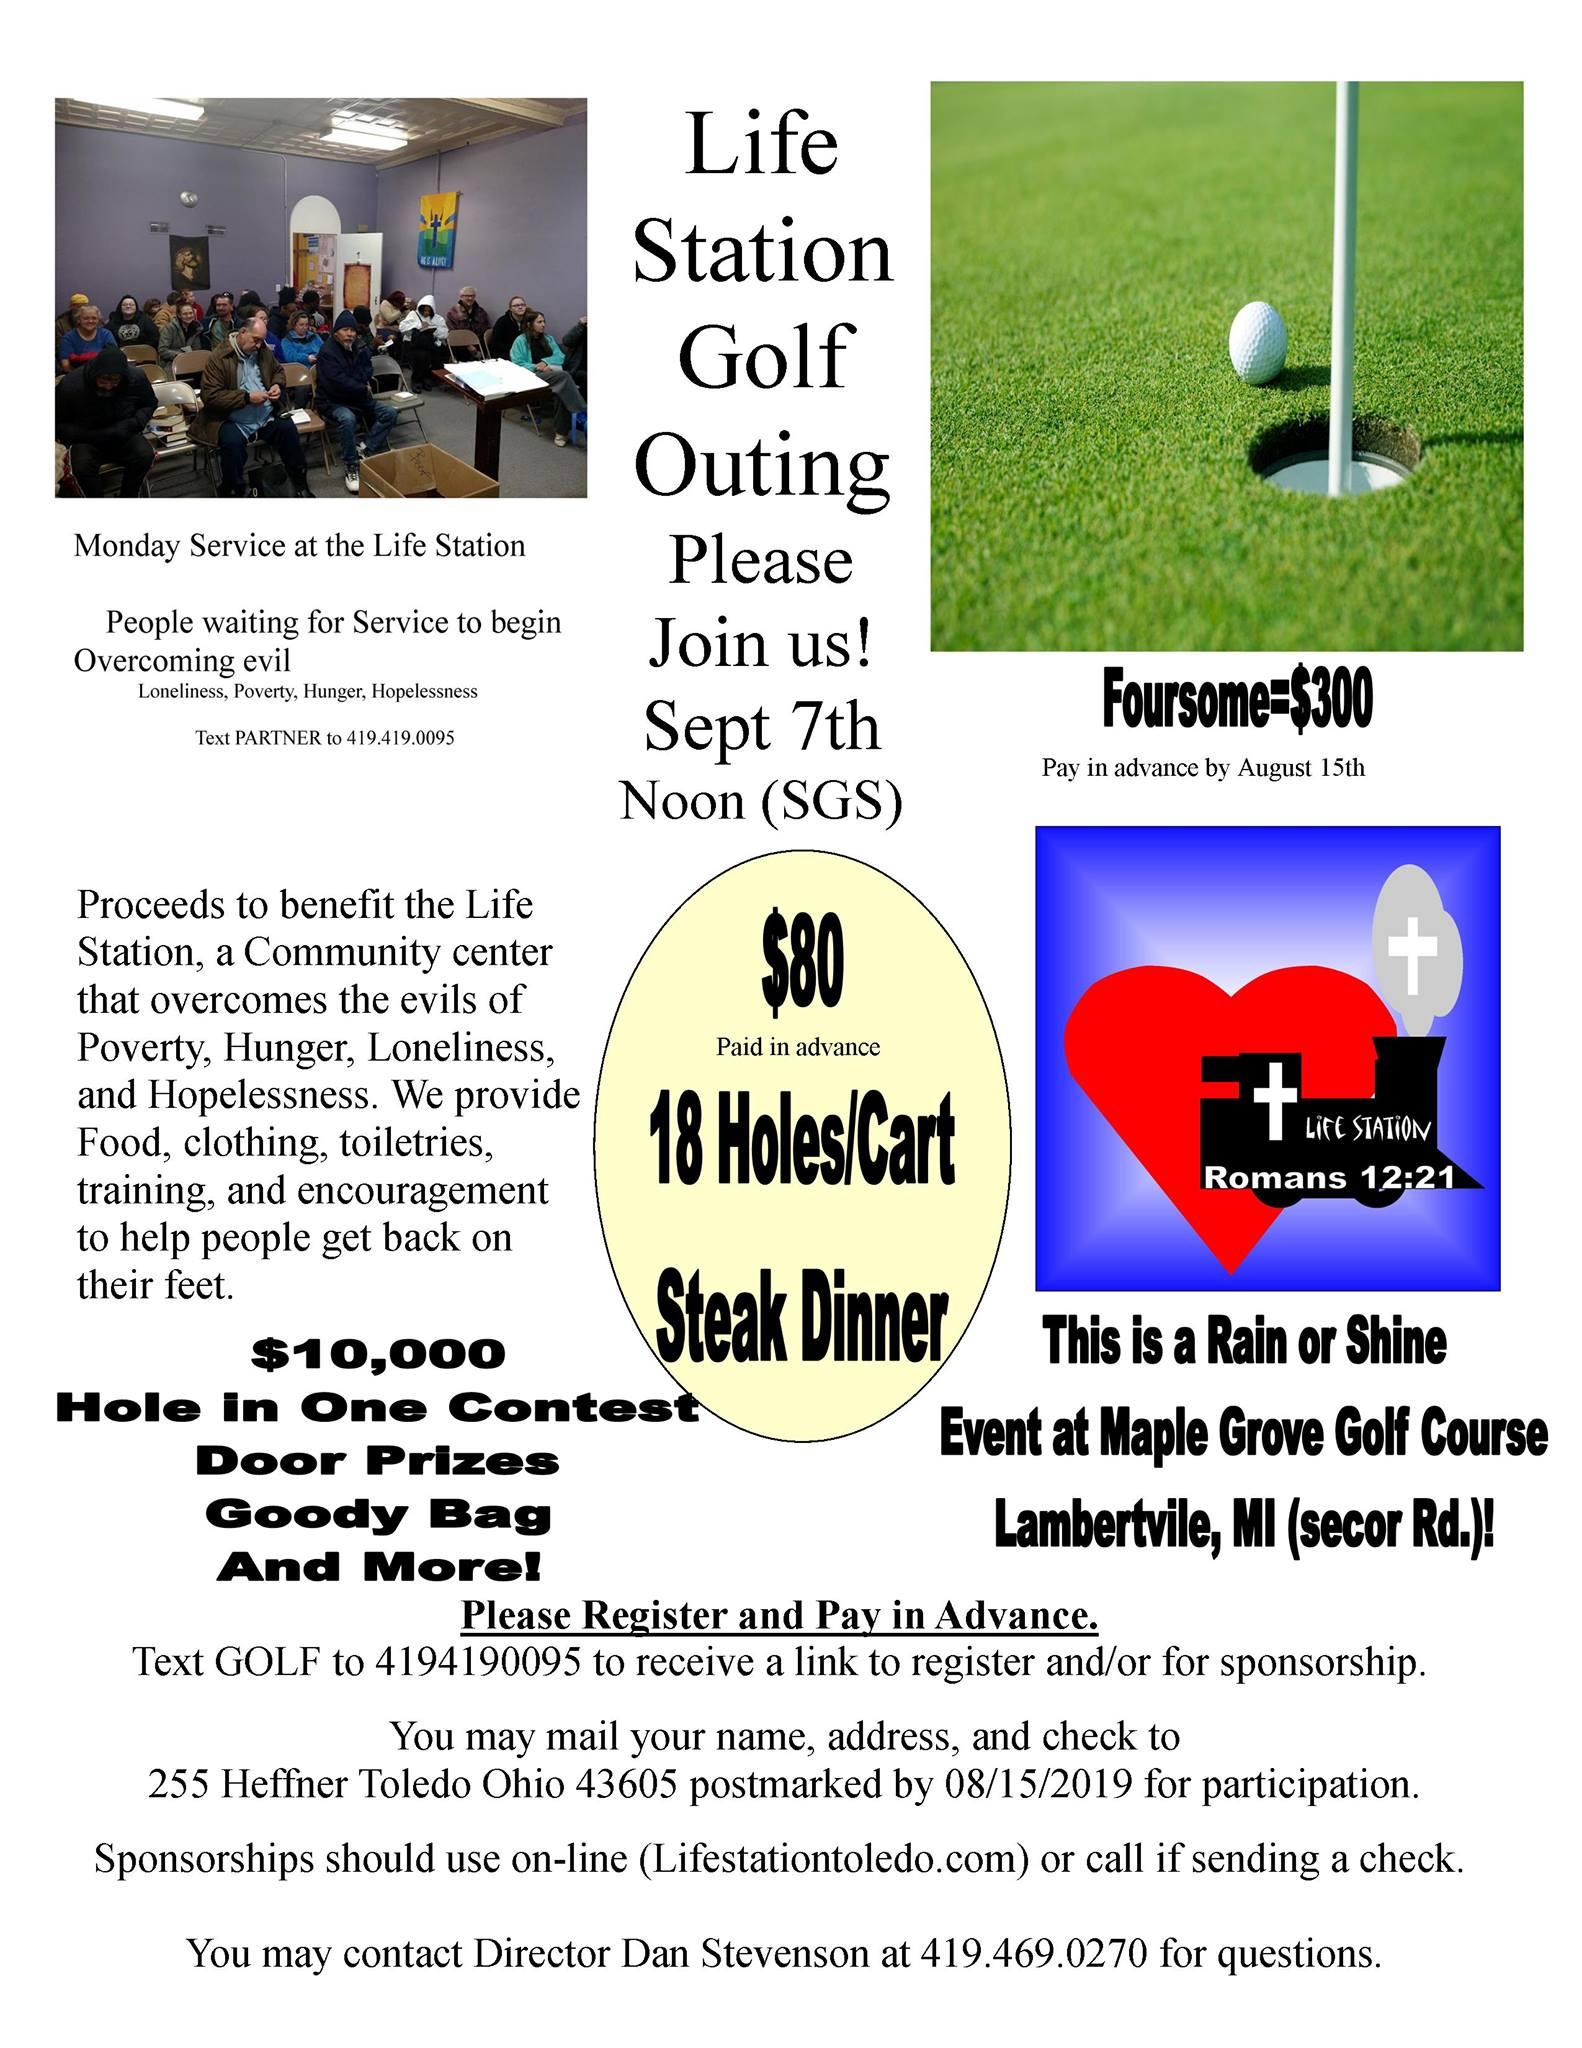 Life Station Golf Outing